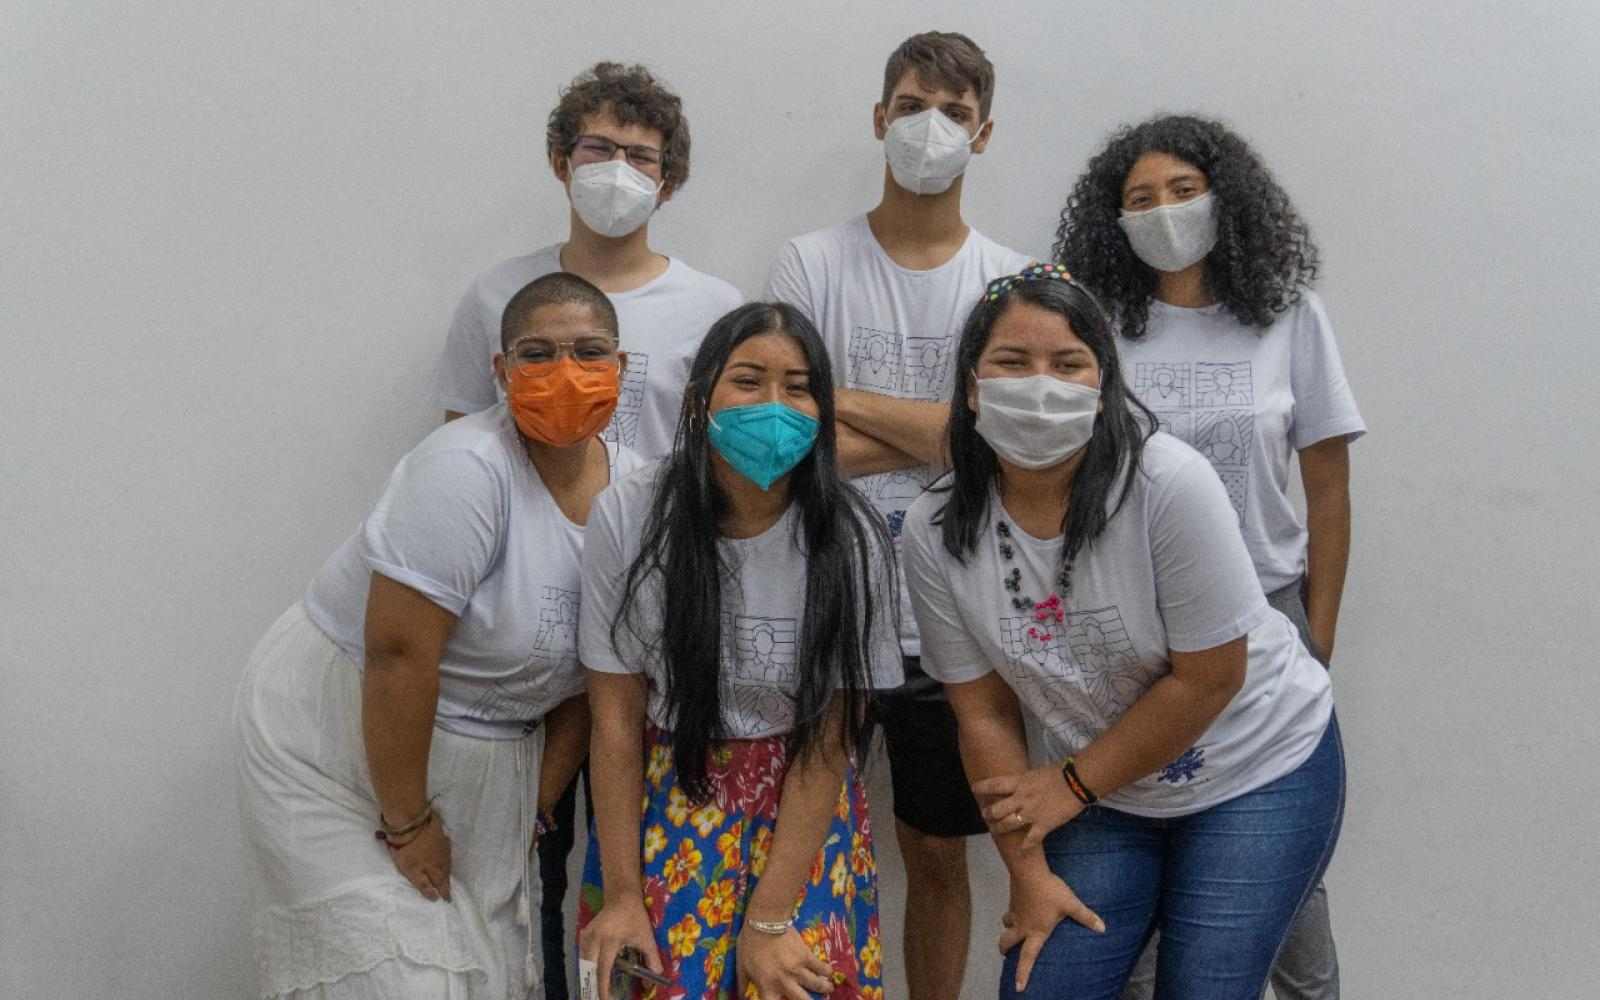 six young changemakers from Amazonia region